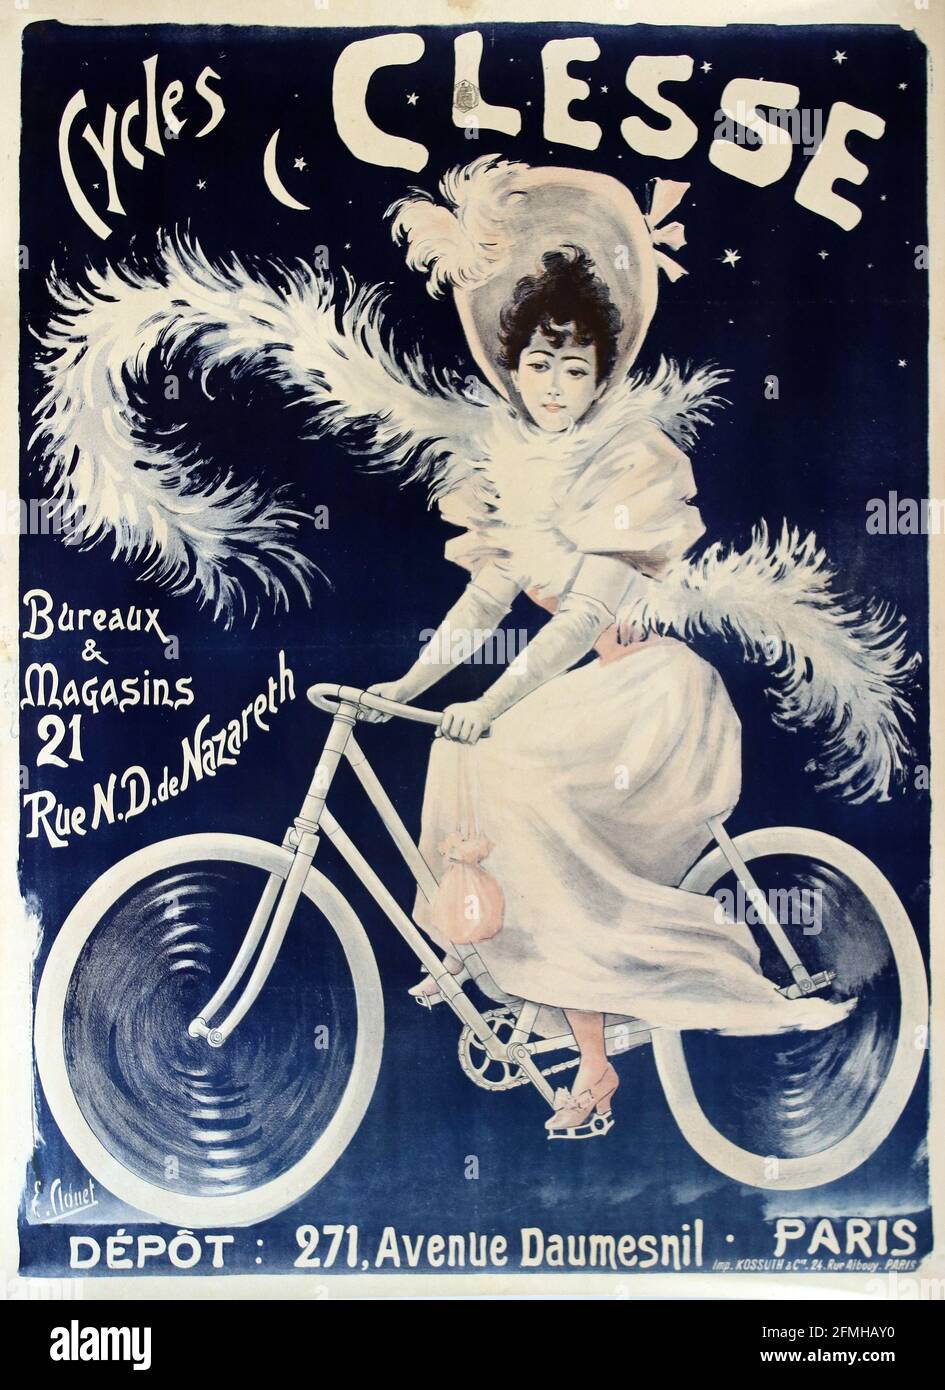 Cycles Clesse Paris. Bicycle advertisement poster. Old and vintage. Digitally enhanced. Stock Photo